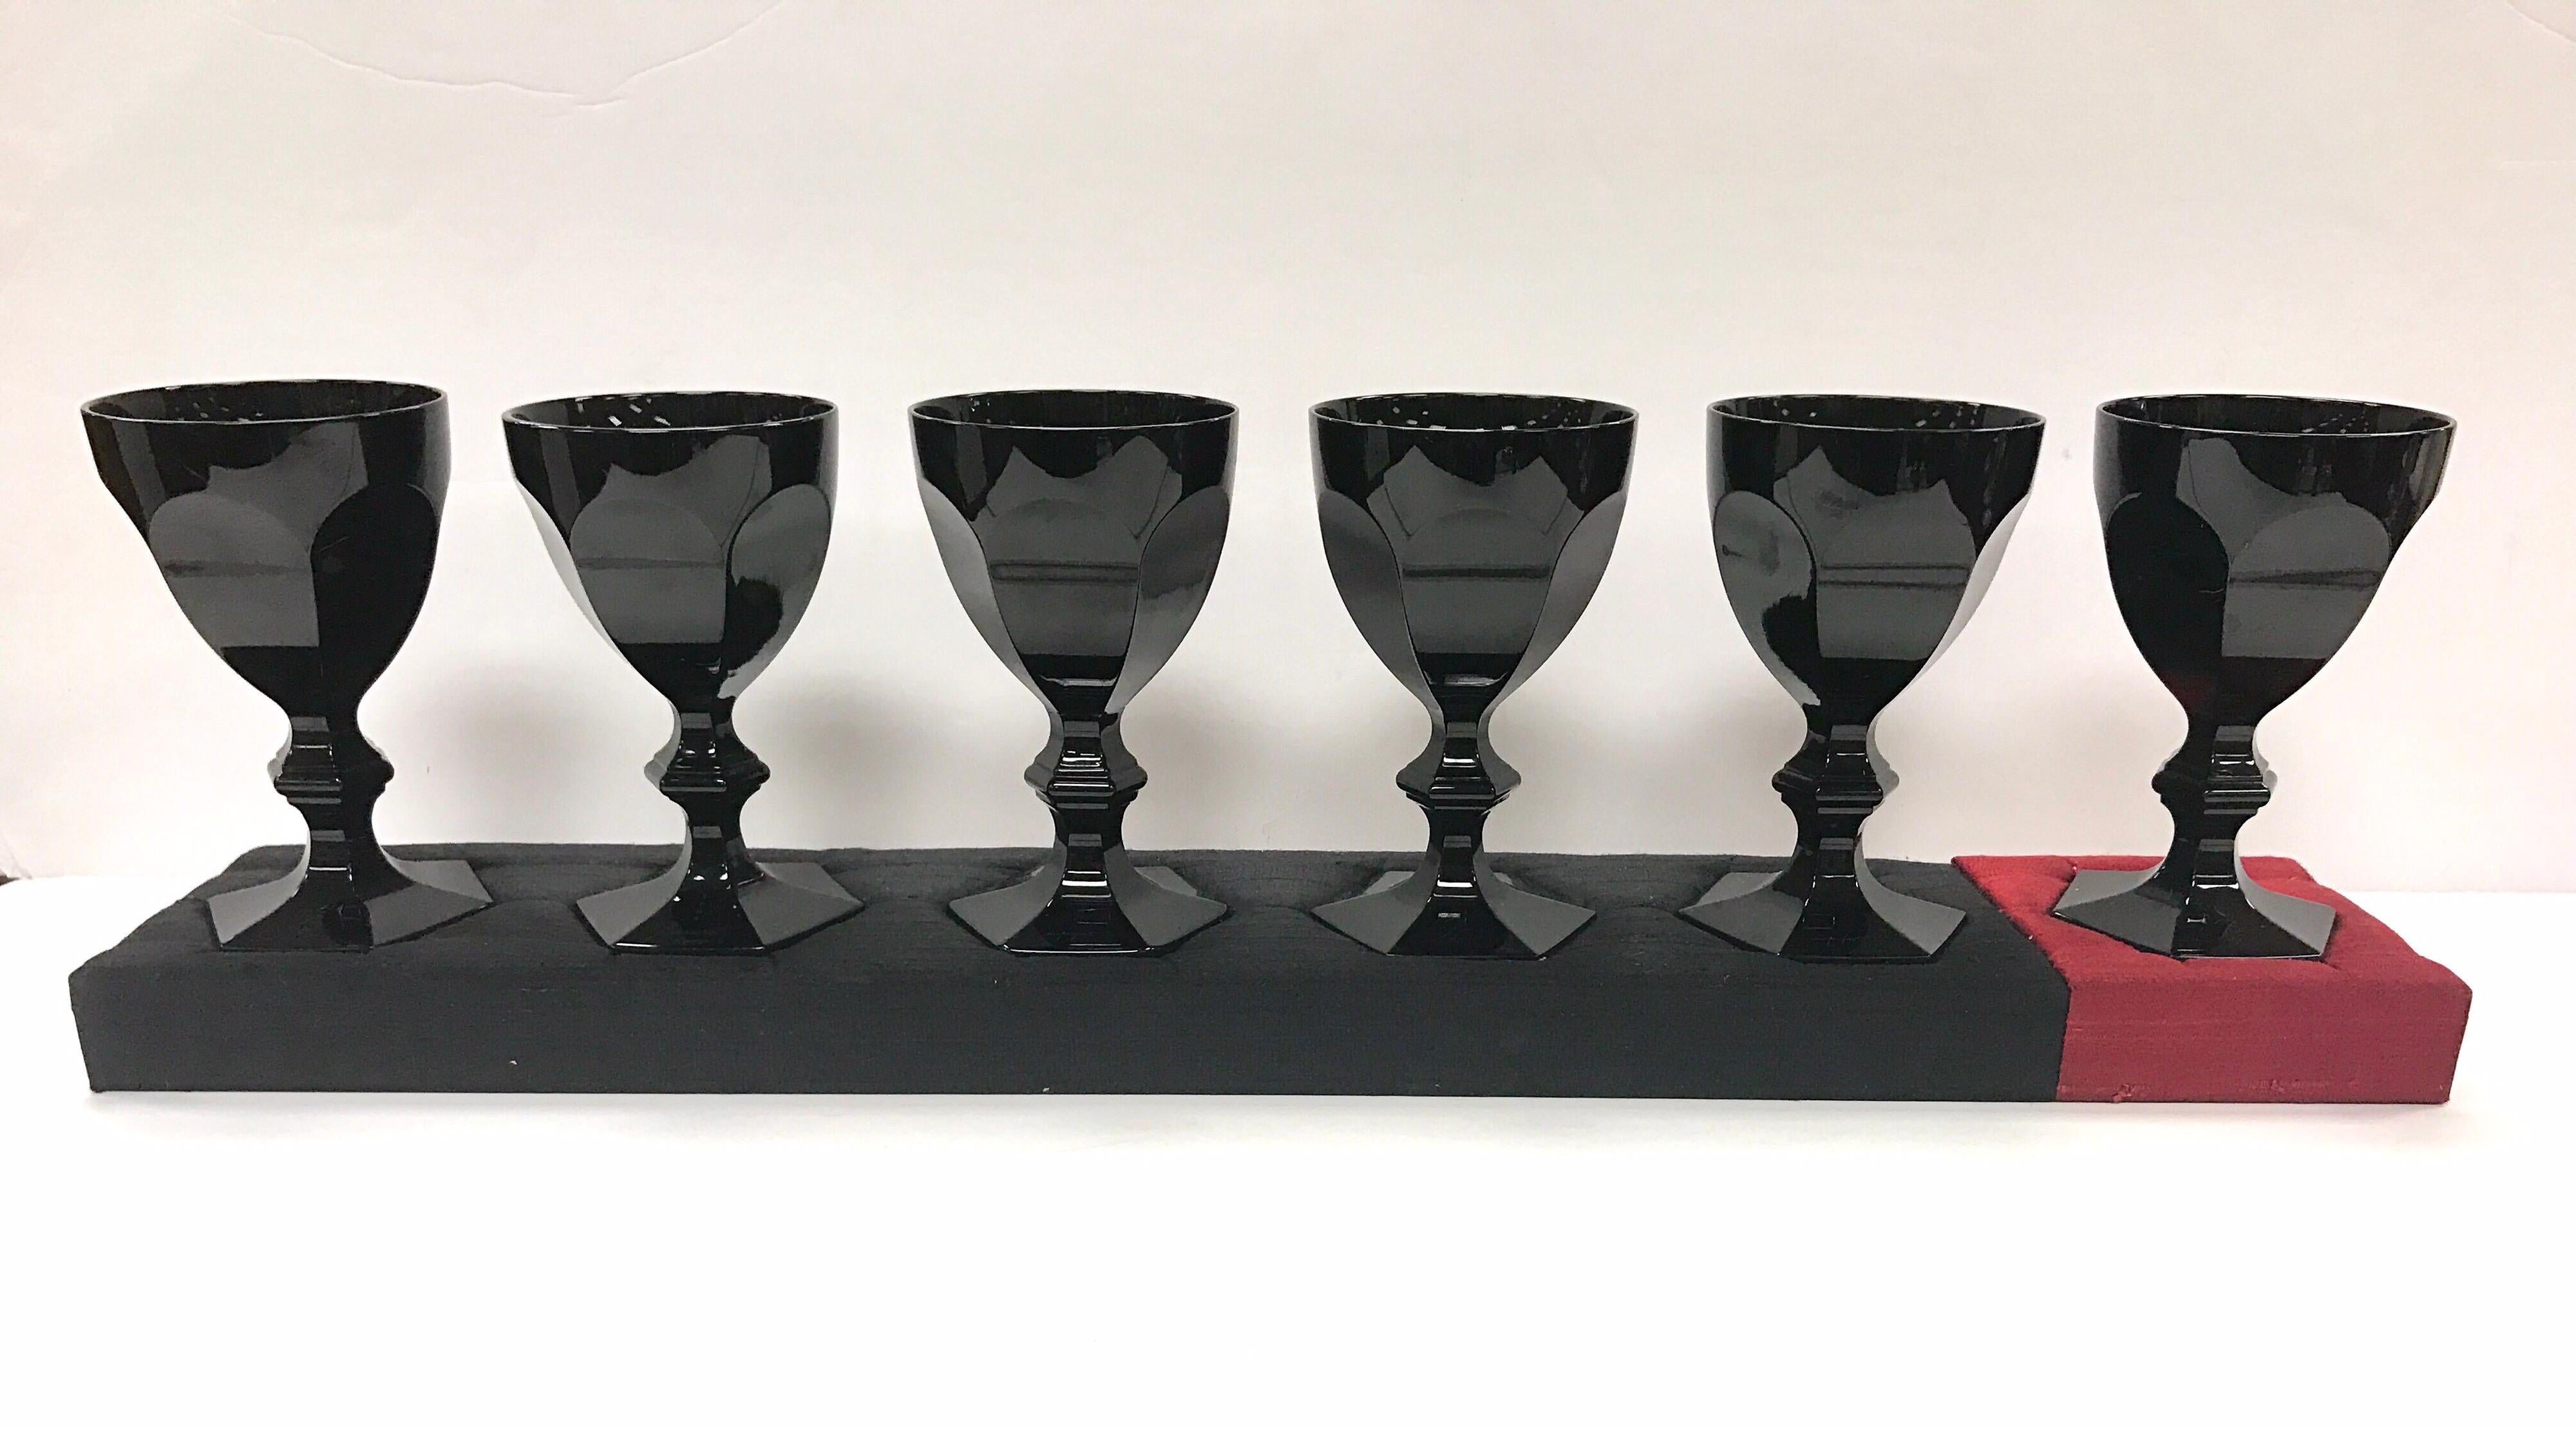 Rare set of Baccarat Harcourt Darkside black goblets with Philipe Starck signature on all. Includes the rare, hand-signed plexiglass case that covers all six fitted pieces and comes with Jean Cocteau phrase and signature.